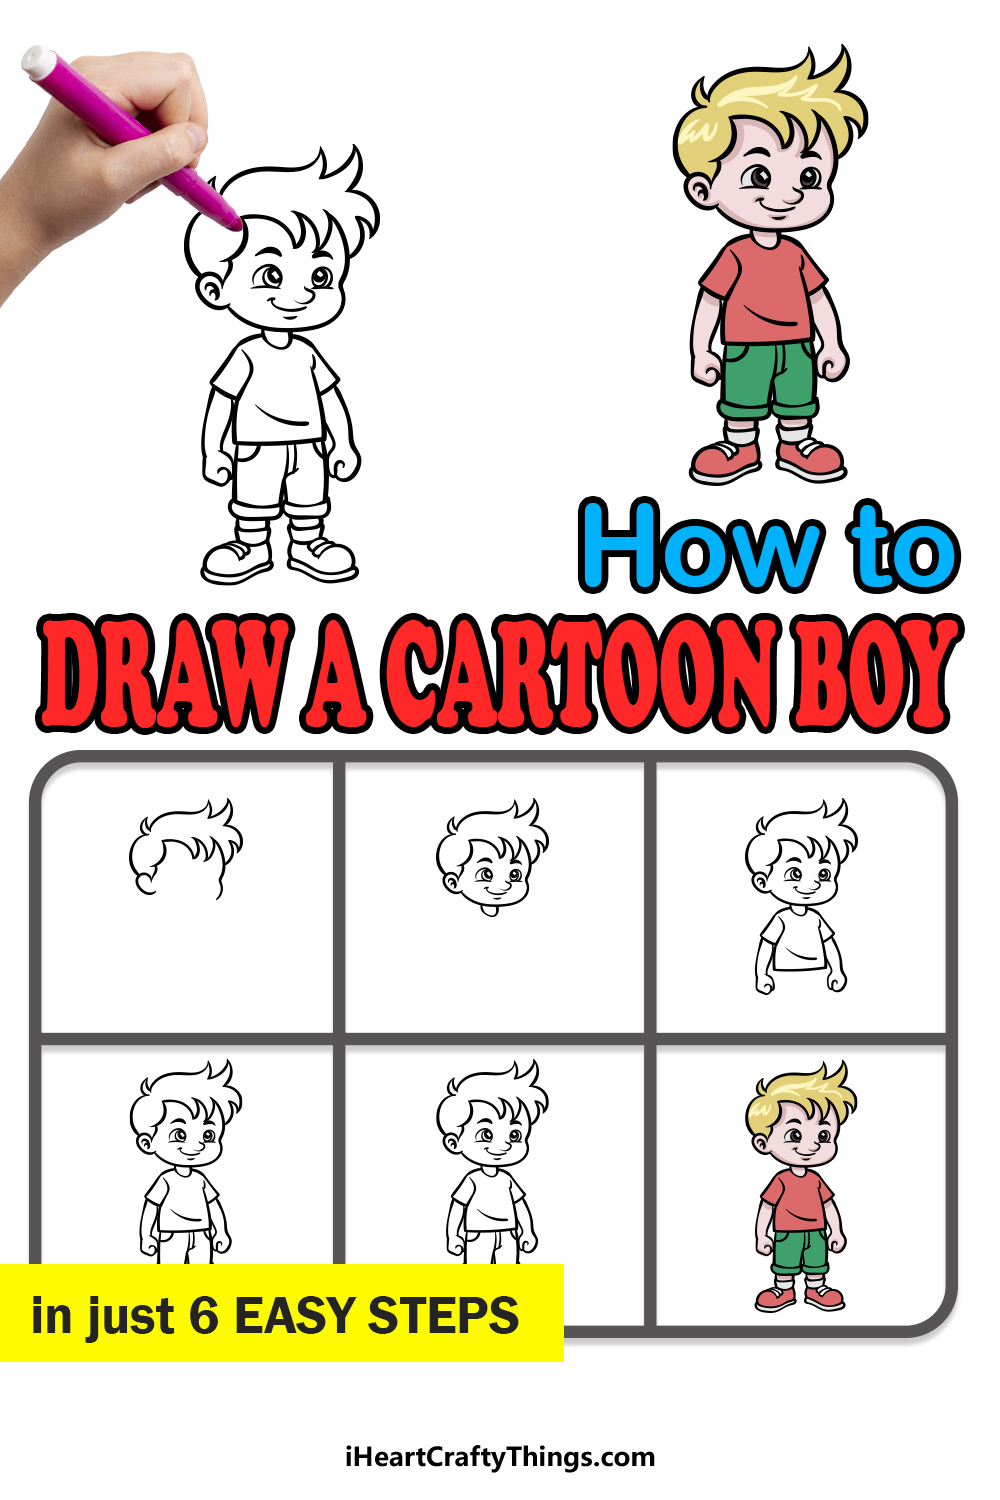 boy drawing - Google Search | Boy drawing, Pictures to draw, Easy drawings-saigonsouth.com.vn